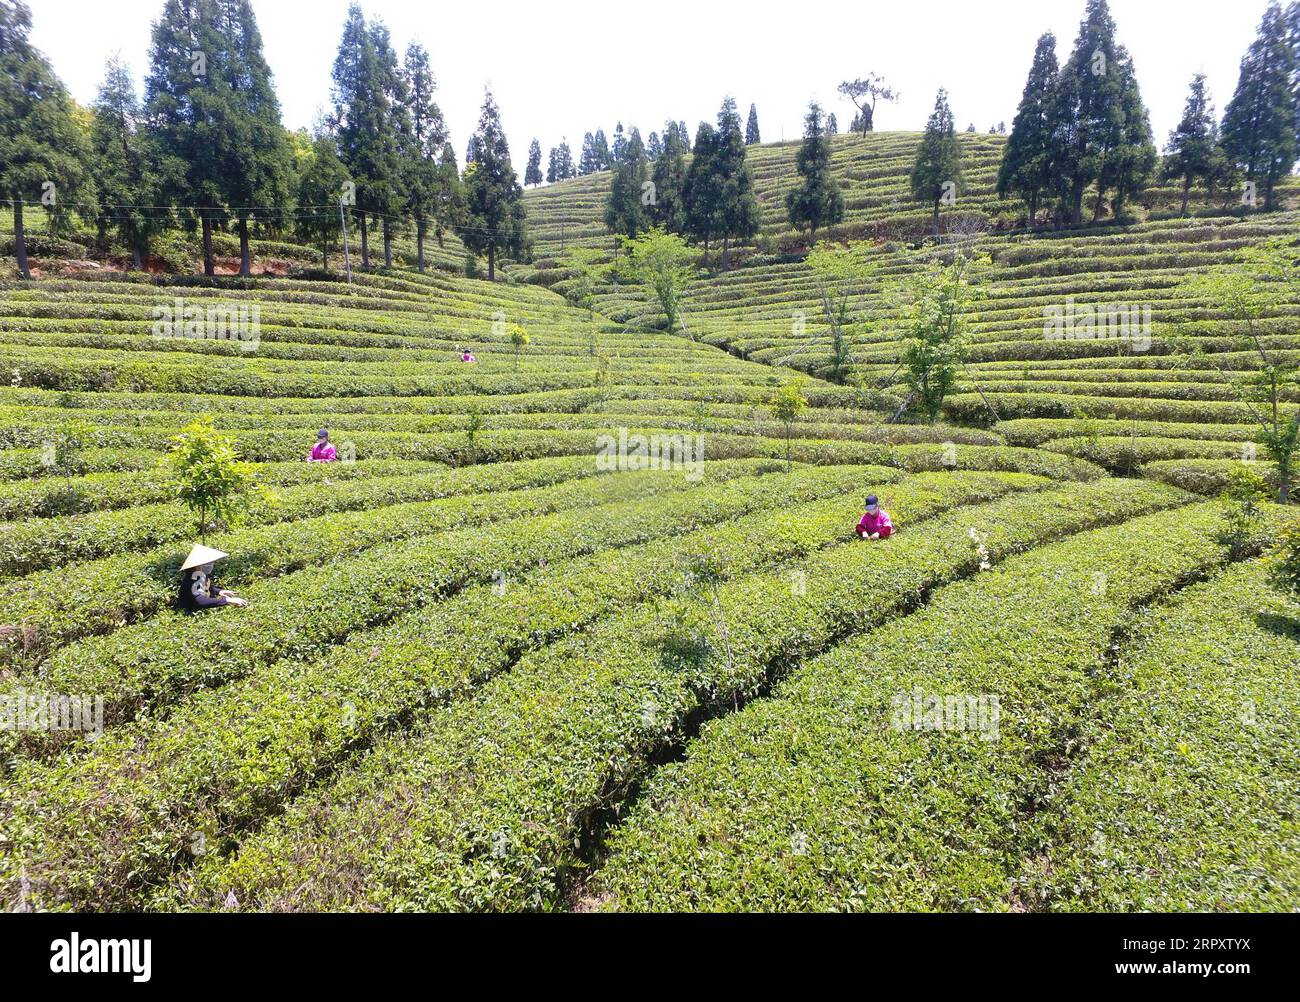 https://c8.alamy.com/comp/2RPXTYX/200603-fuzhou-june-3-2020-aerial-photo-taken-on-april-29-2020-shows-people-working-in-a-tea-garden-in-xuefeng-town-of-minhou-county-southeast-china-s-fujian-province-east-china-s-fujian-province-exported-more-than-7726-tonnes-of-tea-in-the-first-four-months-of-the-year-a-rise-of-87-percent-year-on-year-local-customs-authority-said-tuesday-the-exports-worth-about-135-million-us-dollars-were-mainly-oolong-tea-green-tea-and-black-tea-fujian-is-a-major-tea-production-base-in-china-with-the-locally-produced-oolong-tea-green-tea-black-tea-and-jasmine-tea-especially-popular-a-2RPXTYX.jpg